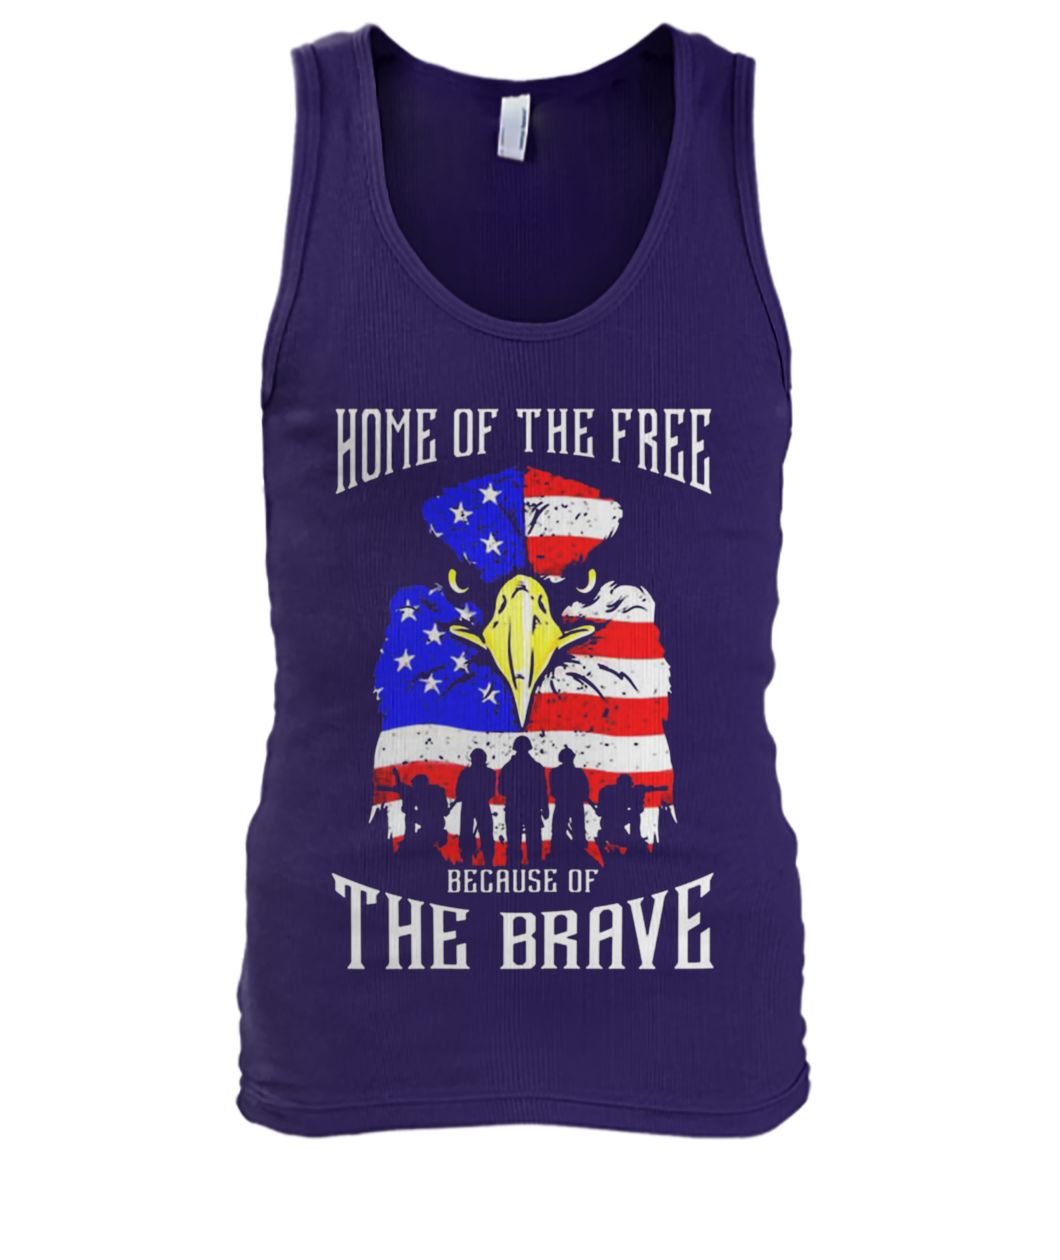 Home of the free because of the brave eagle US flag men's tank top